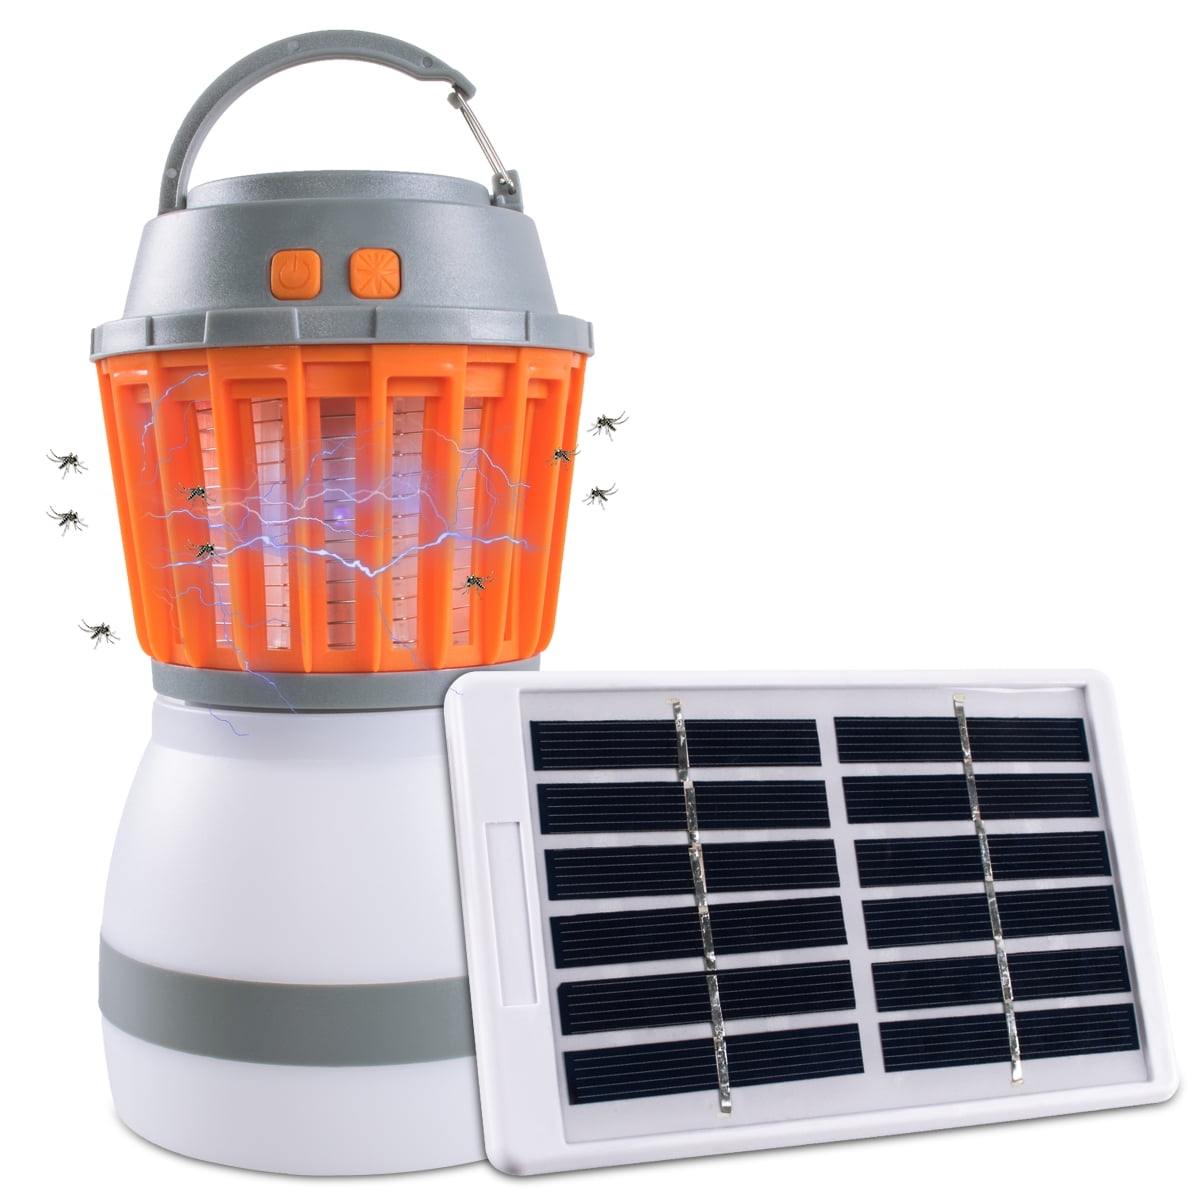 Details about   Outdoor Mosquito Killer Lamp CampingLight 2000rpm LED Electric Fly Insect Zapper 